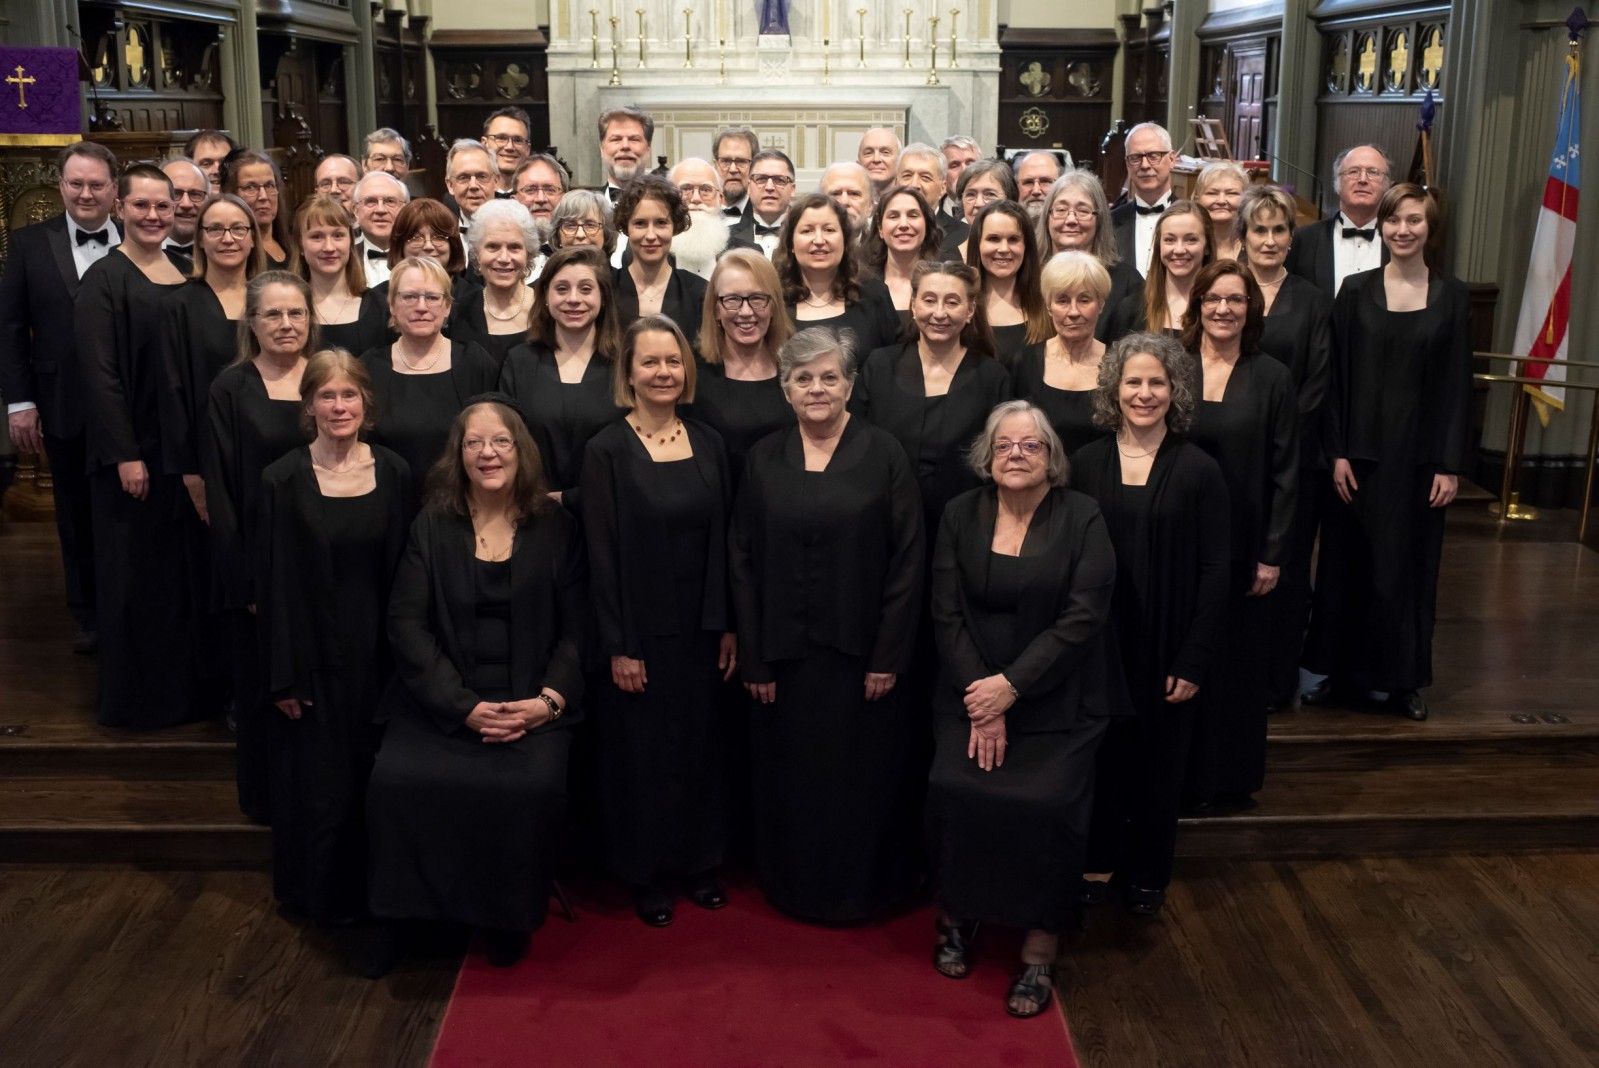 Seattle Bach Choir. Before our "All Night Vigil" concert, March 2019. Photo by Pinehurt Photography.